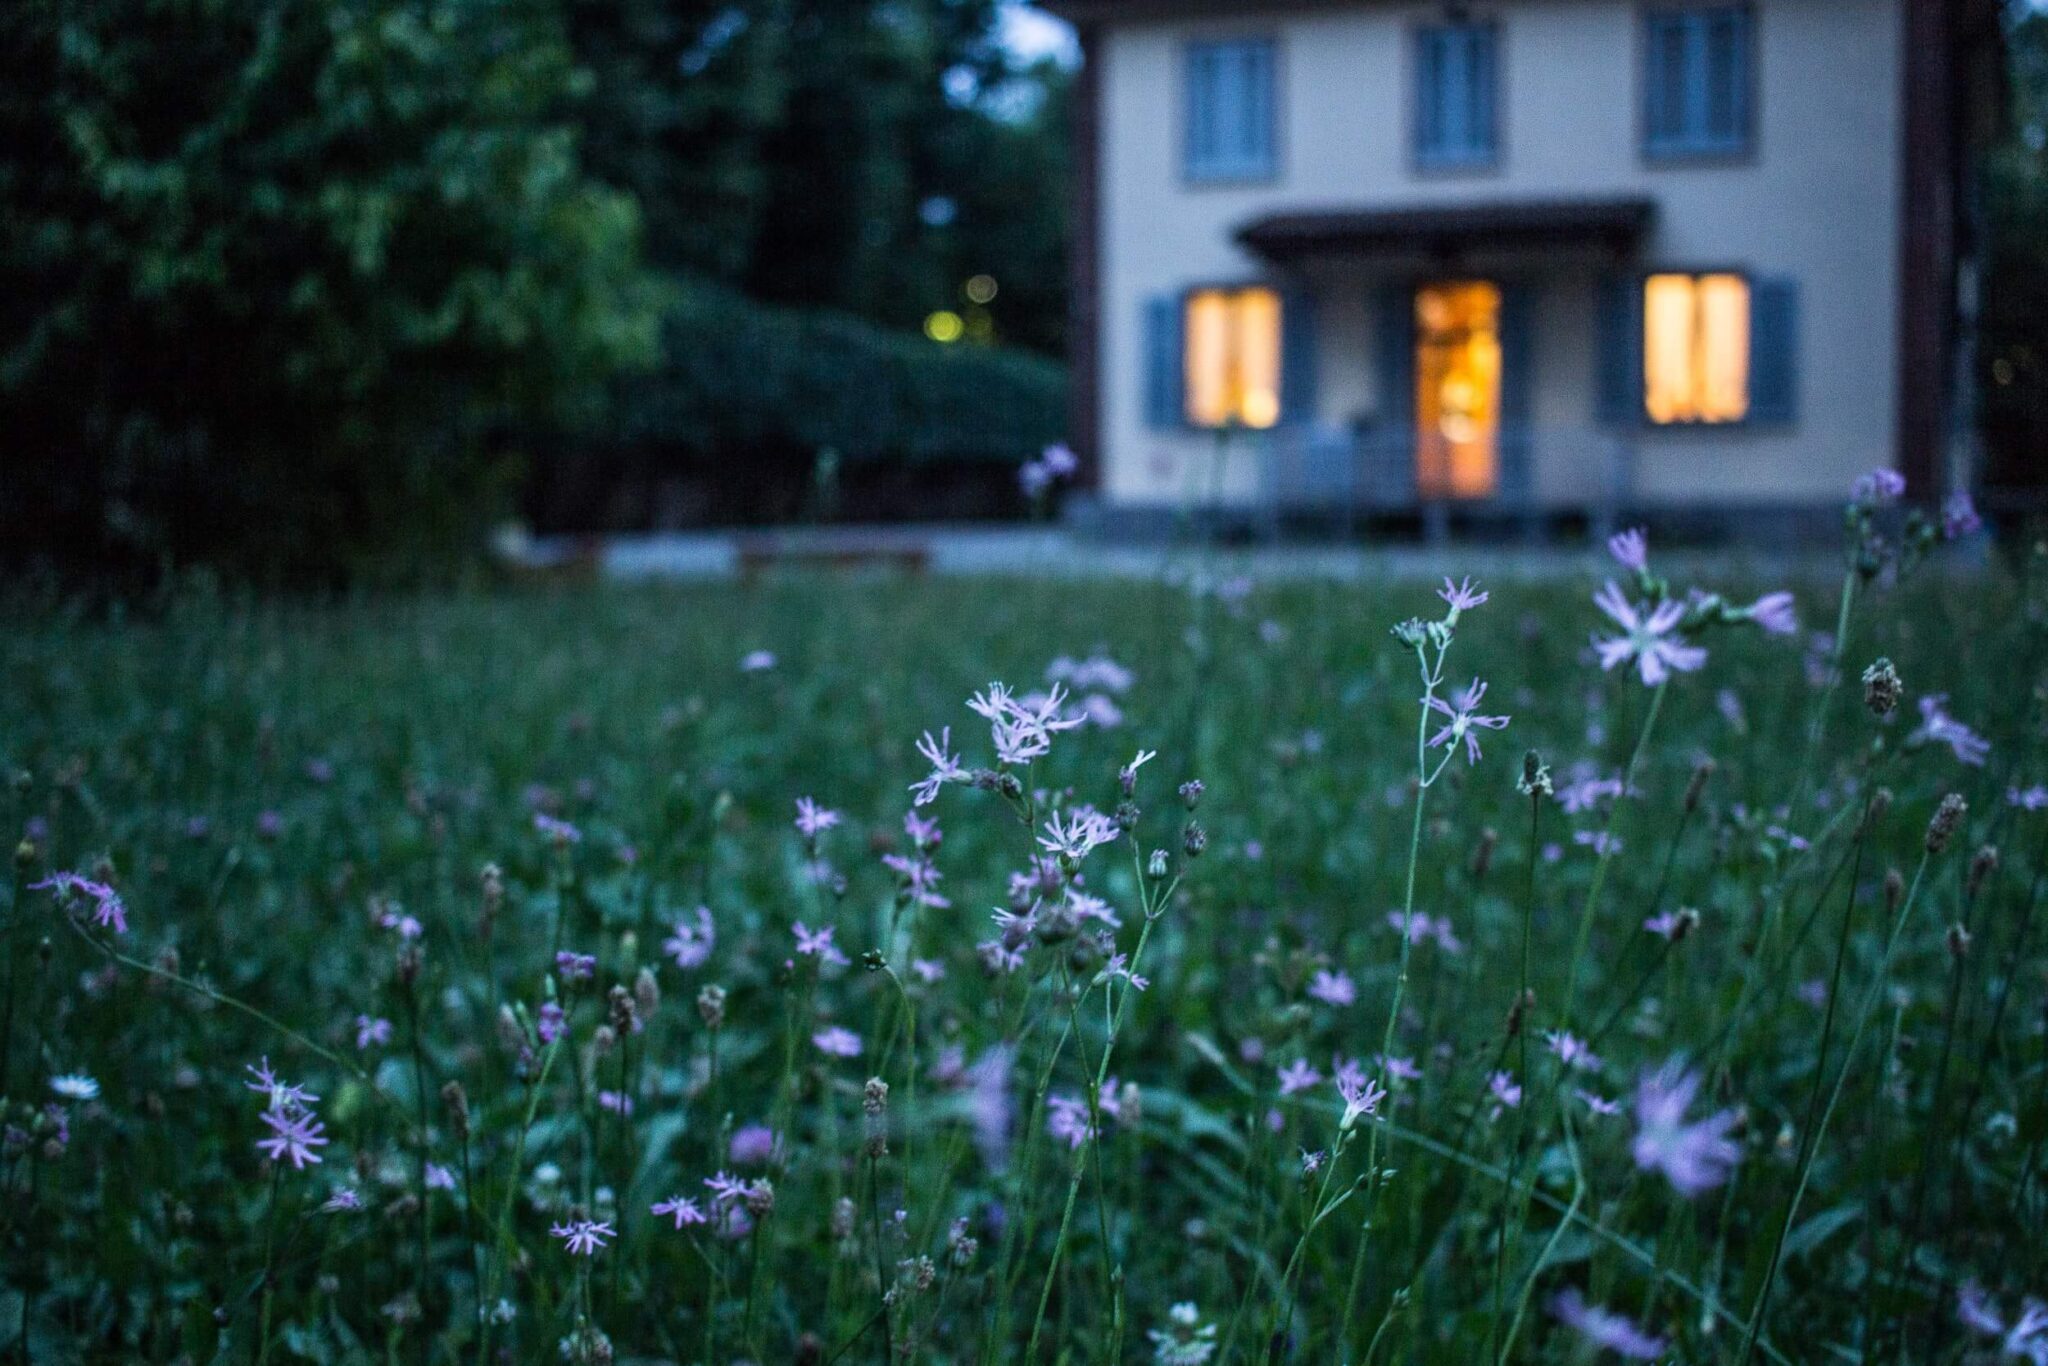 A house at dusk with a front yard full of wildflowers. The lights are on in the house, and the house seems to be very safe.